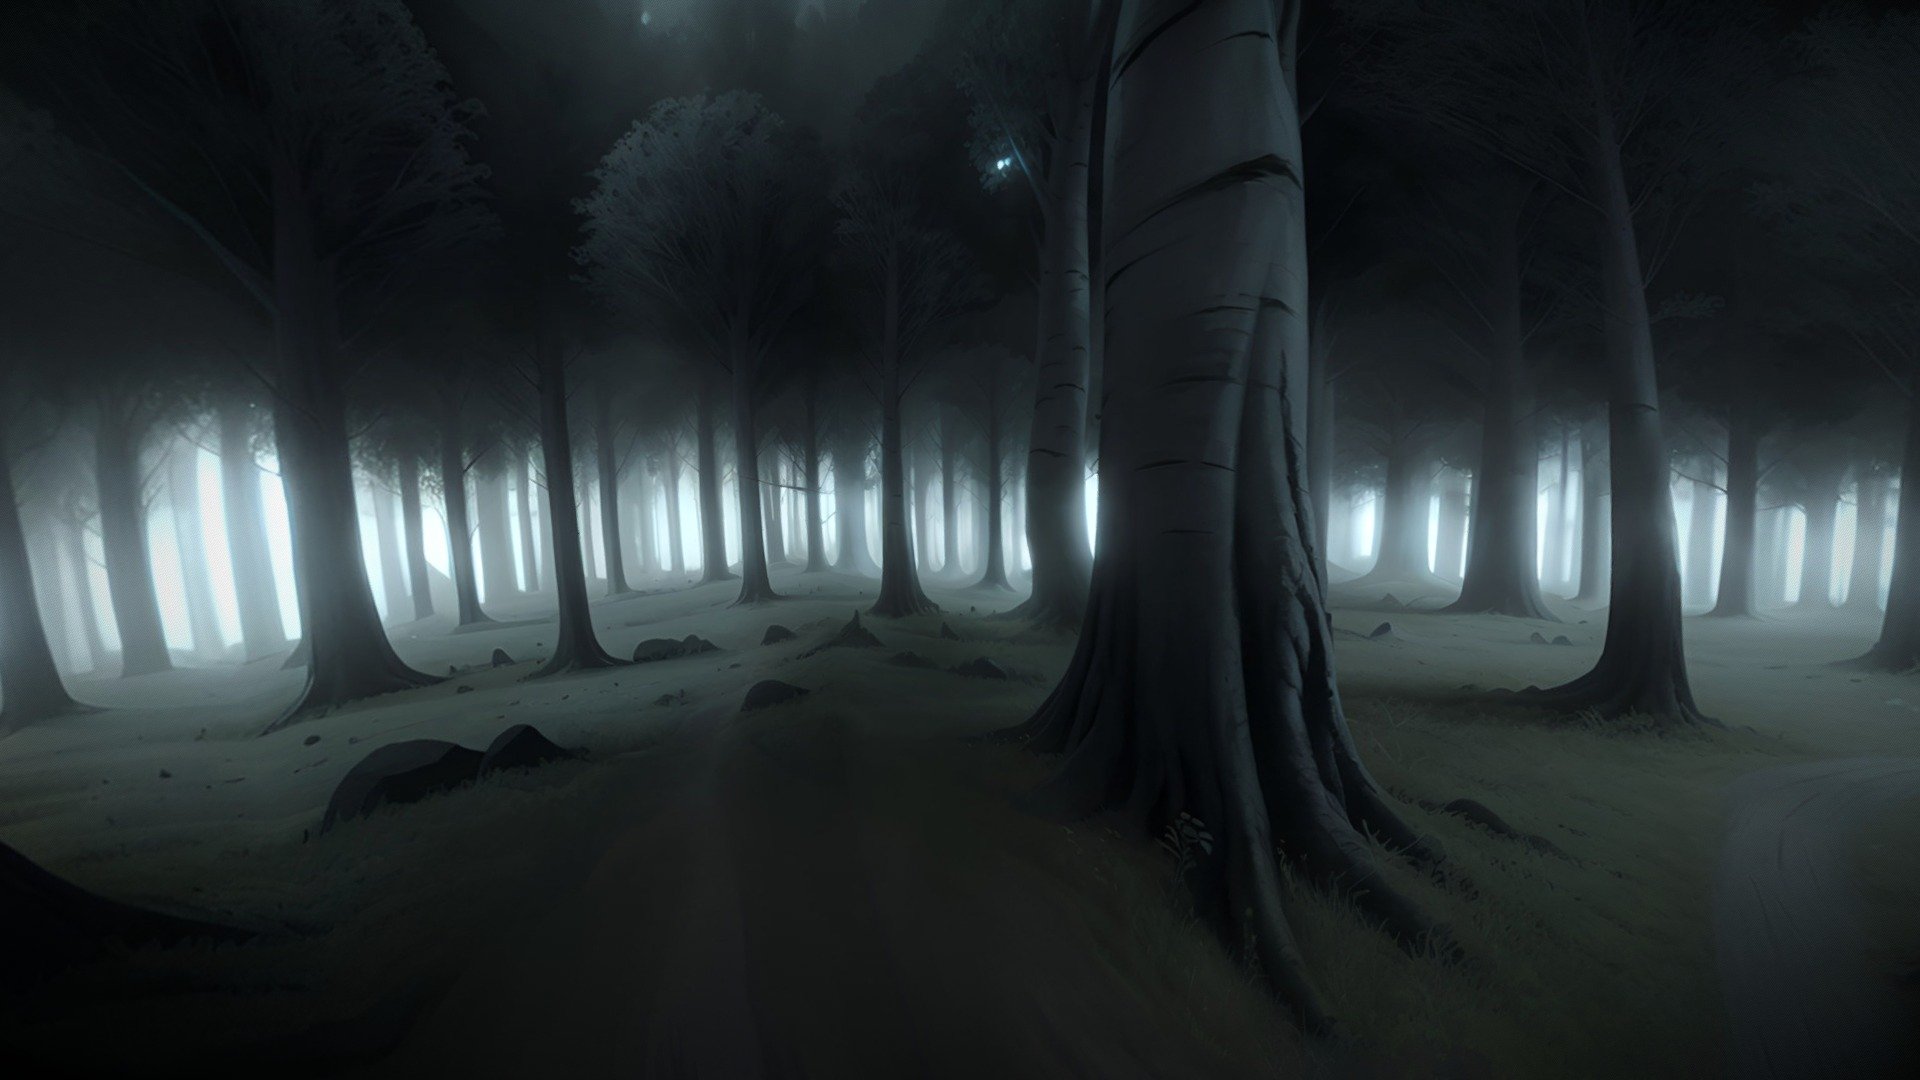 creepy stylized  skybox. Perfect for spooky, stylized environments and your rendering scene.

The package contains one panorama texture and one cubemap texture (png)

panorama texture: 8192 x 4096

cubemap texture: 6144 x 4608

Because of this size it is easier to customize more and better details if you want that.
The sizes can be changed in your graphics program as desired

( textures are under Other available downloads)

used: AI, Photoshop

*-------------Terms of Use--------------

Commercial use of the assets provided is permitted but cannot be included in an asset pack or sold at any sort of asset/resource marketplace or be shared for free* - creepy misty forest  skybox 007 - Buy Royalty Free 3D model by stylized skybox (@skybox_) 3d model